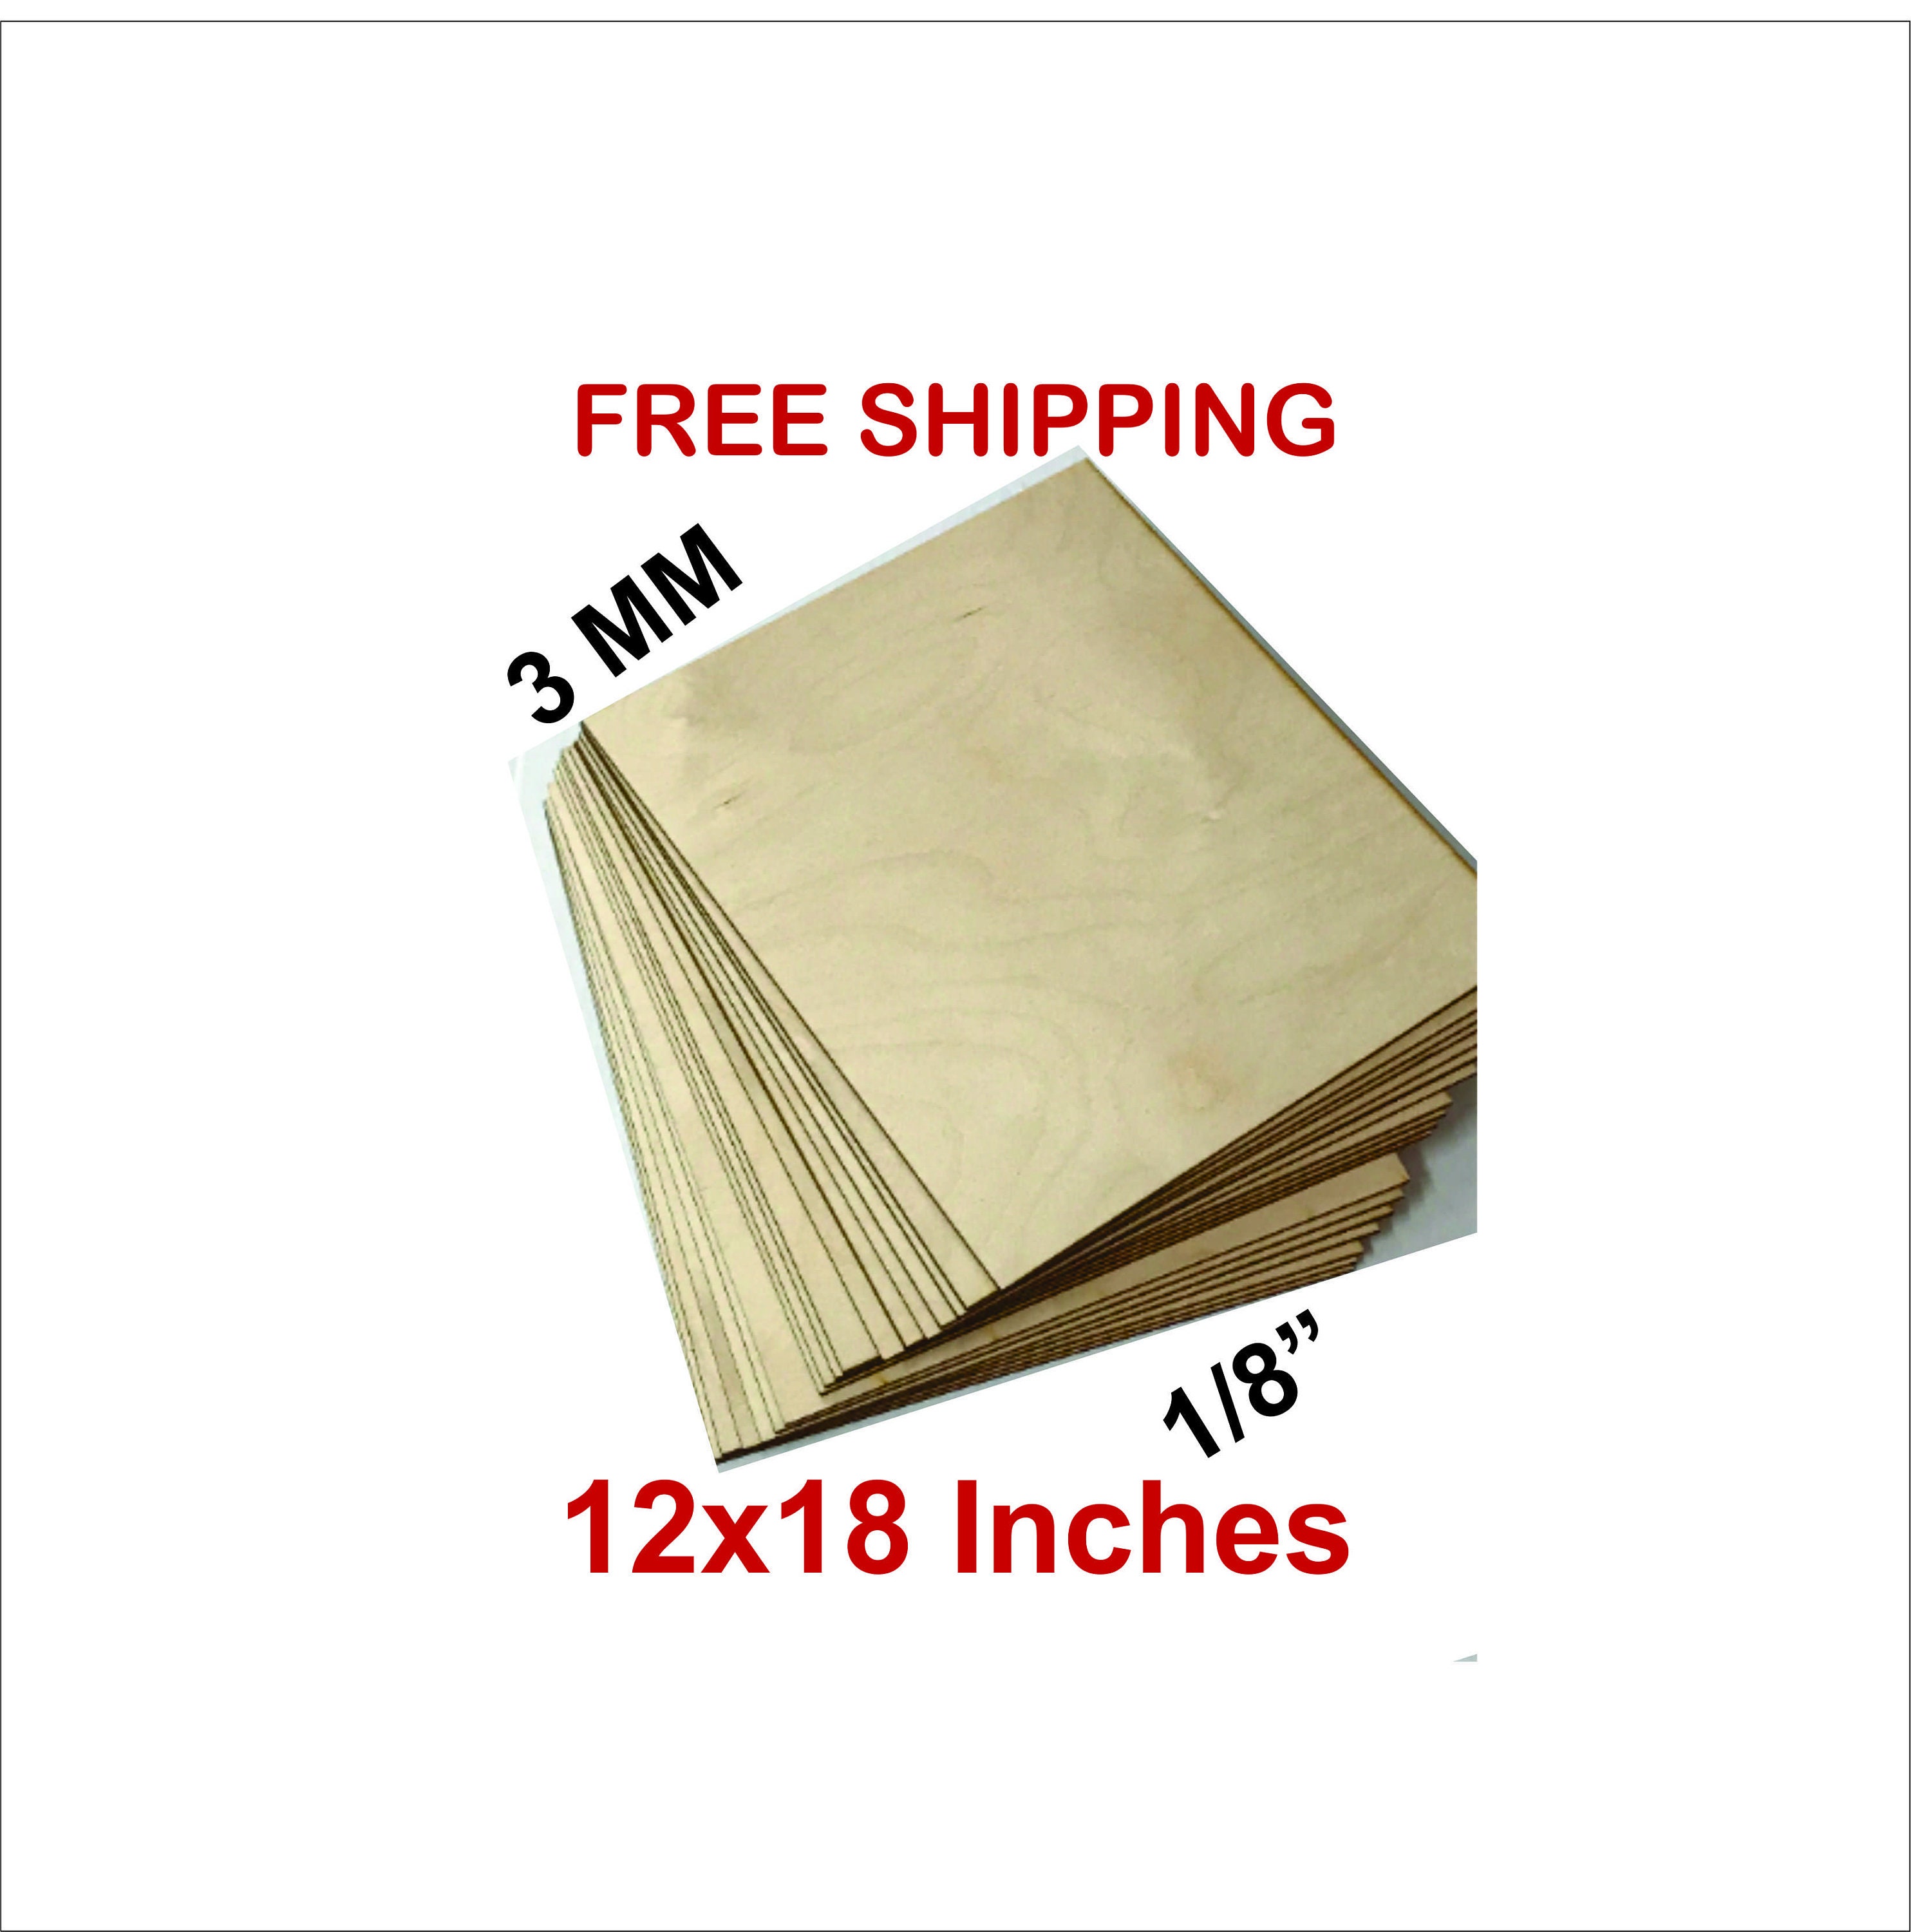 Buy 3mm Basswood（56 pcs） - Affordable Price